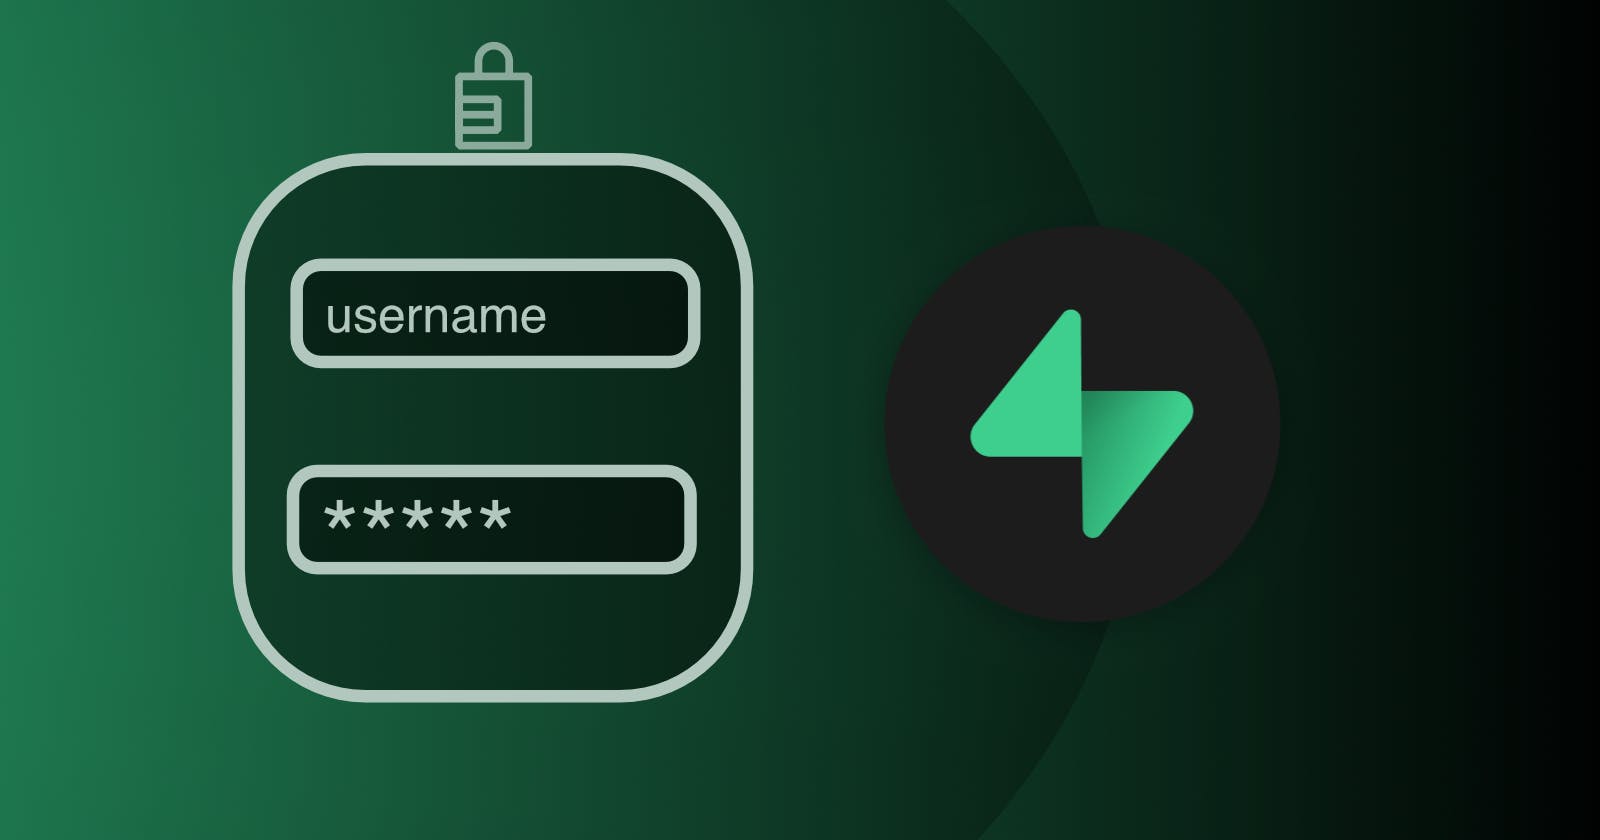 Building User Authentication with Username and Password using Supabase